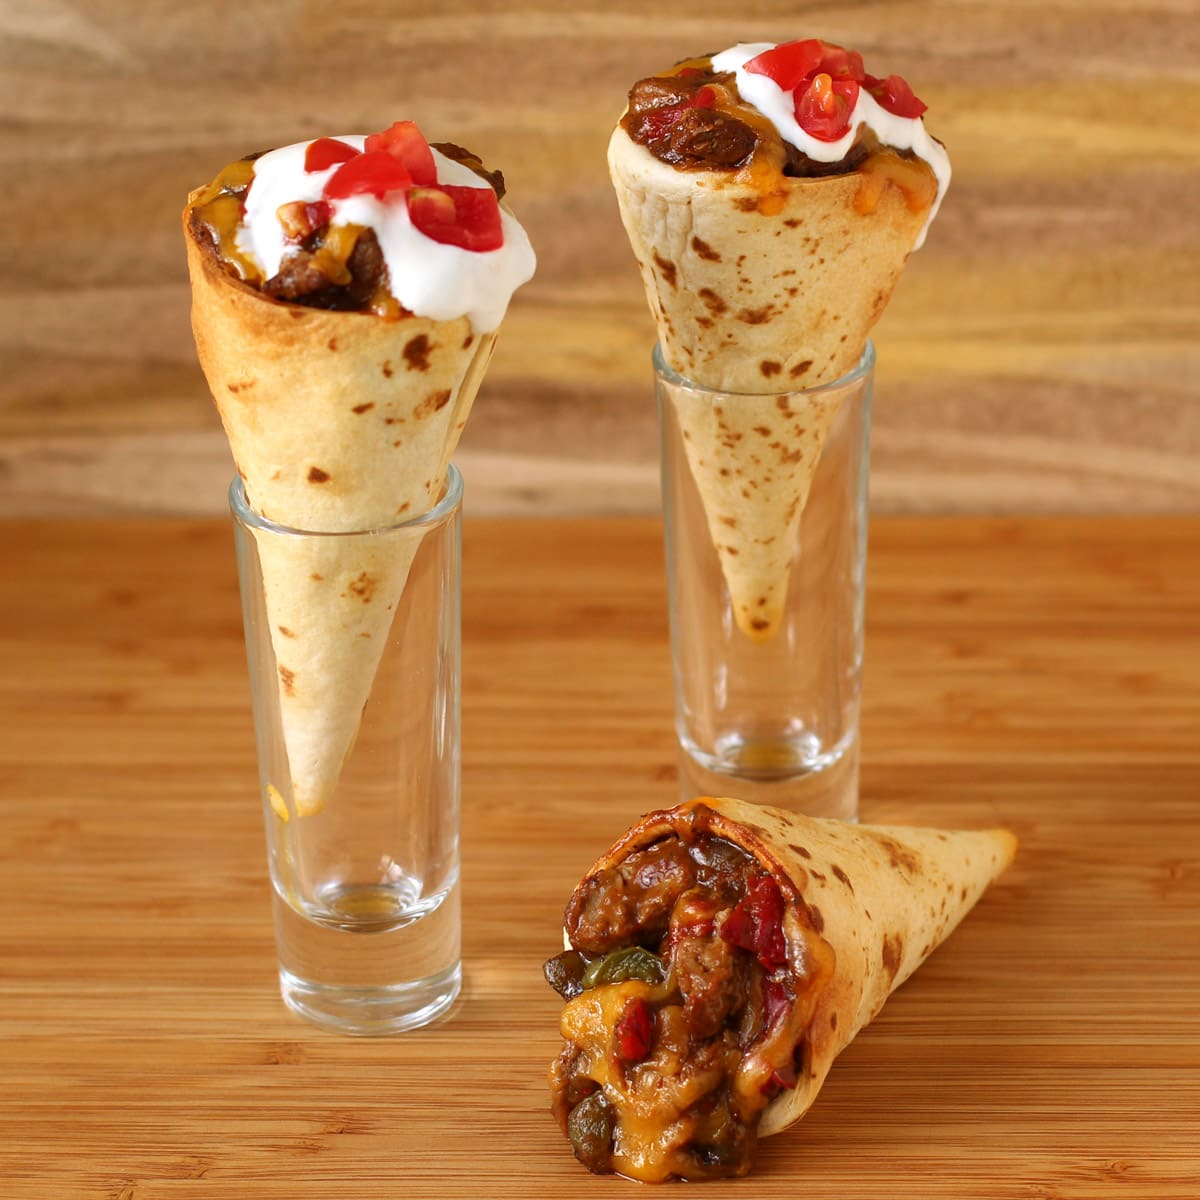 savory cones baked tortillas filled with steak and peppers